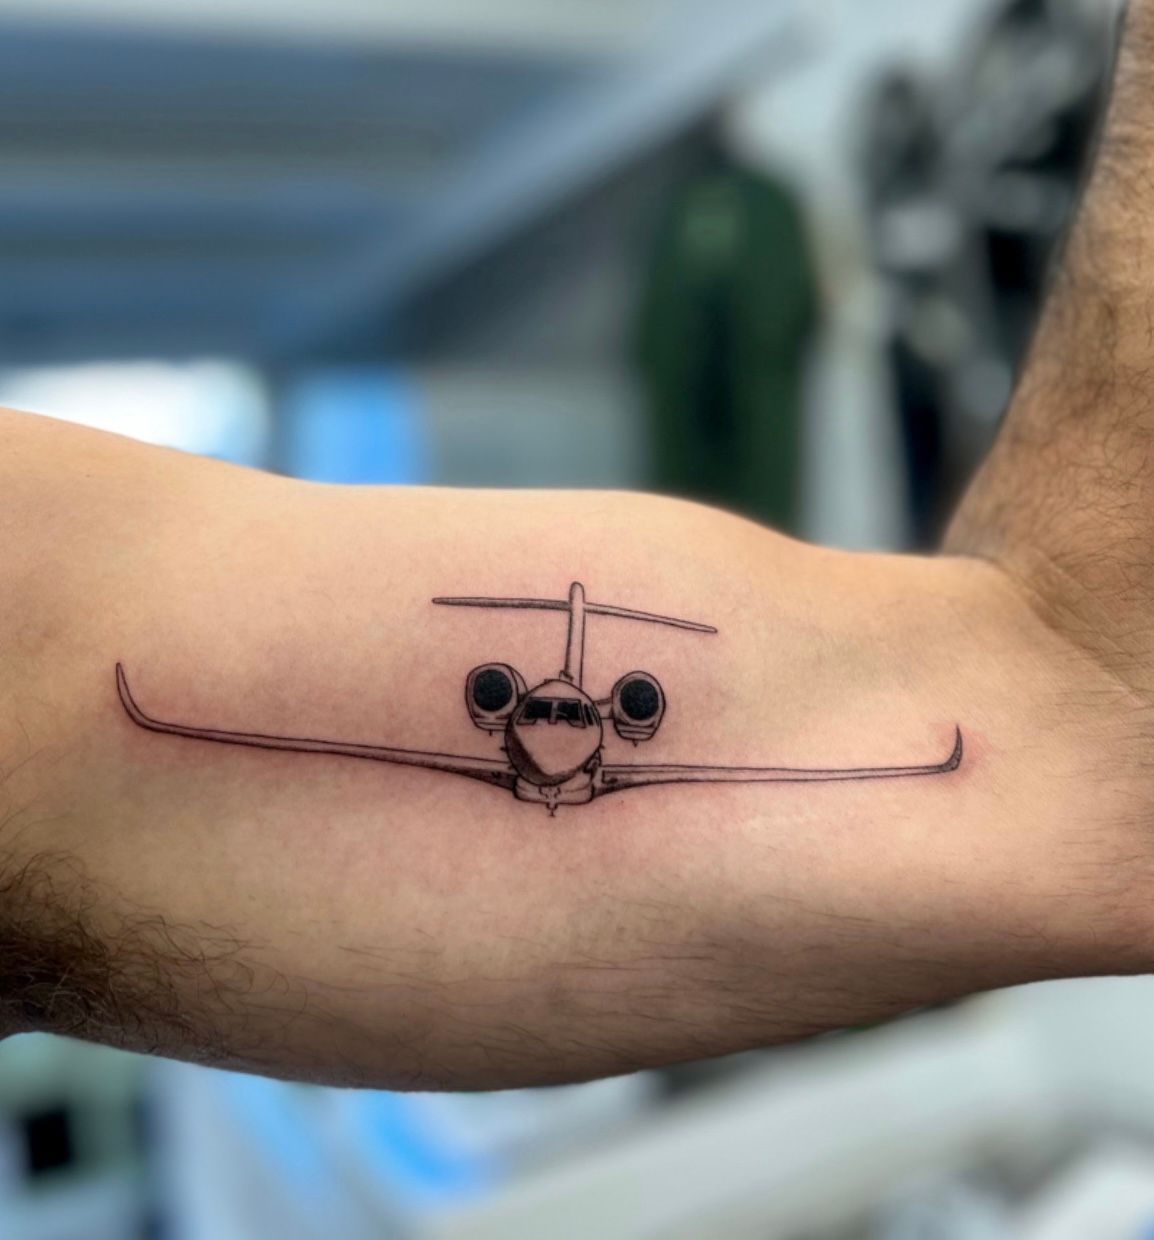 Airplane Tattoo for Parlour at Rs 499/inch in Bengaluru | ID: 21990271255